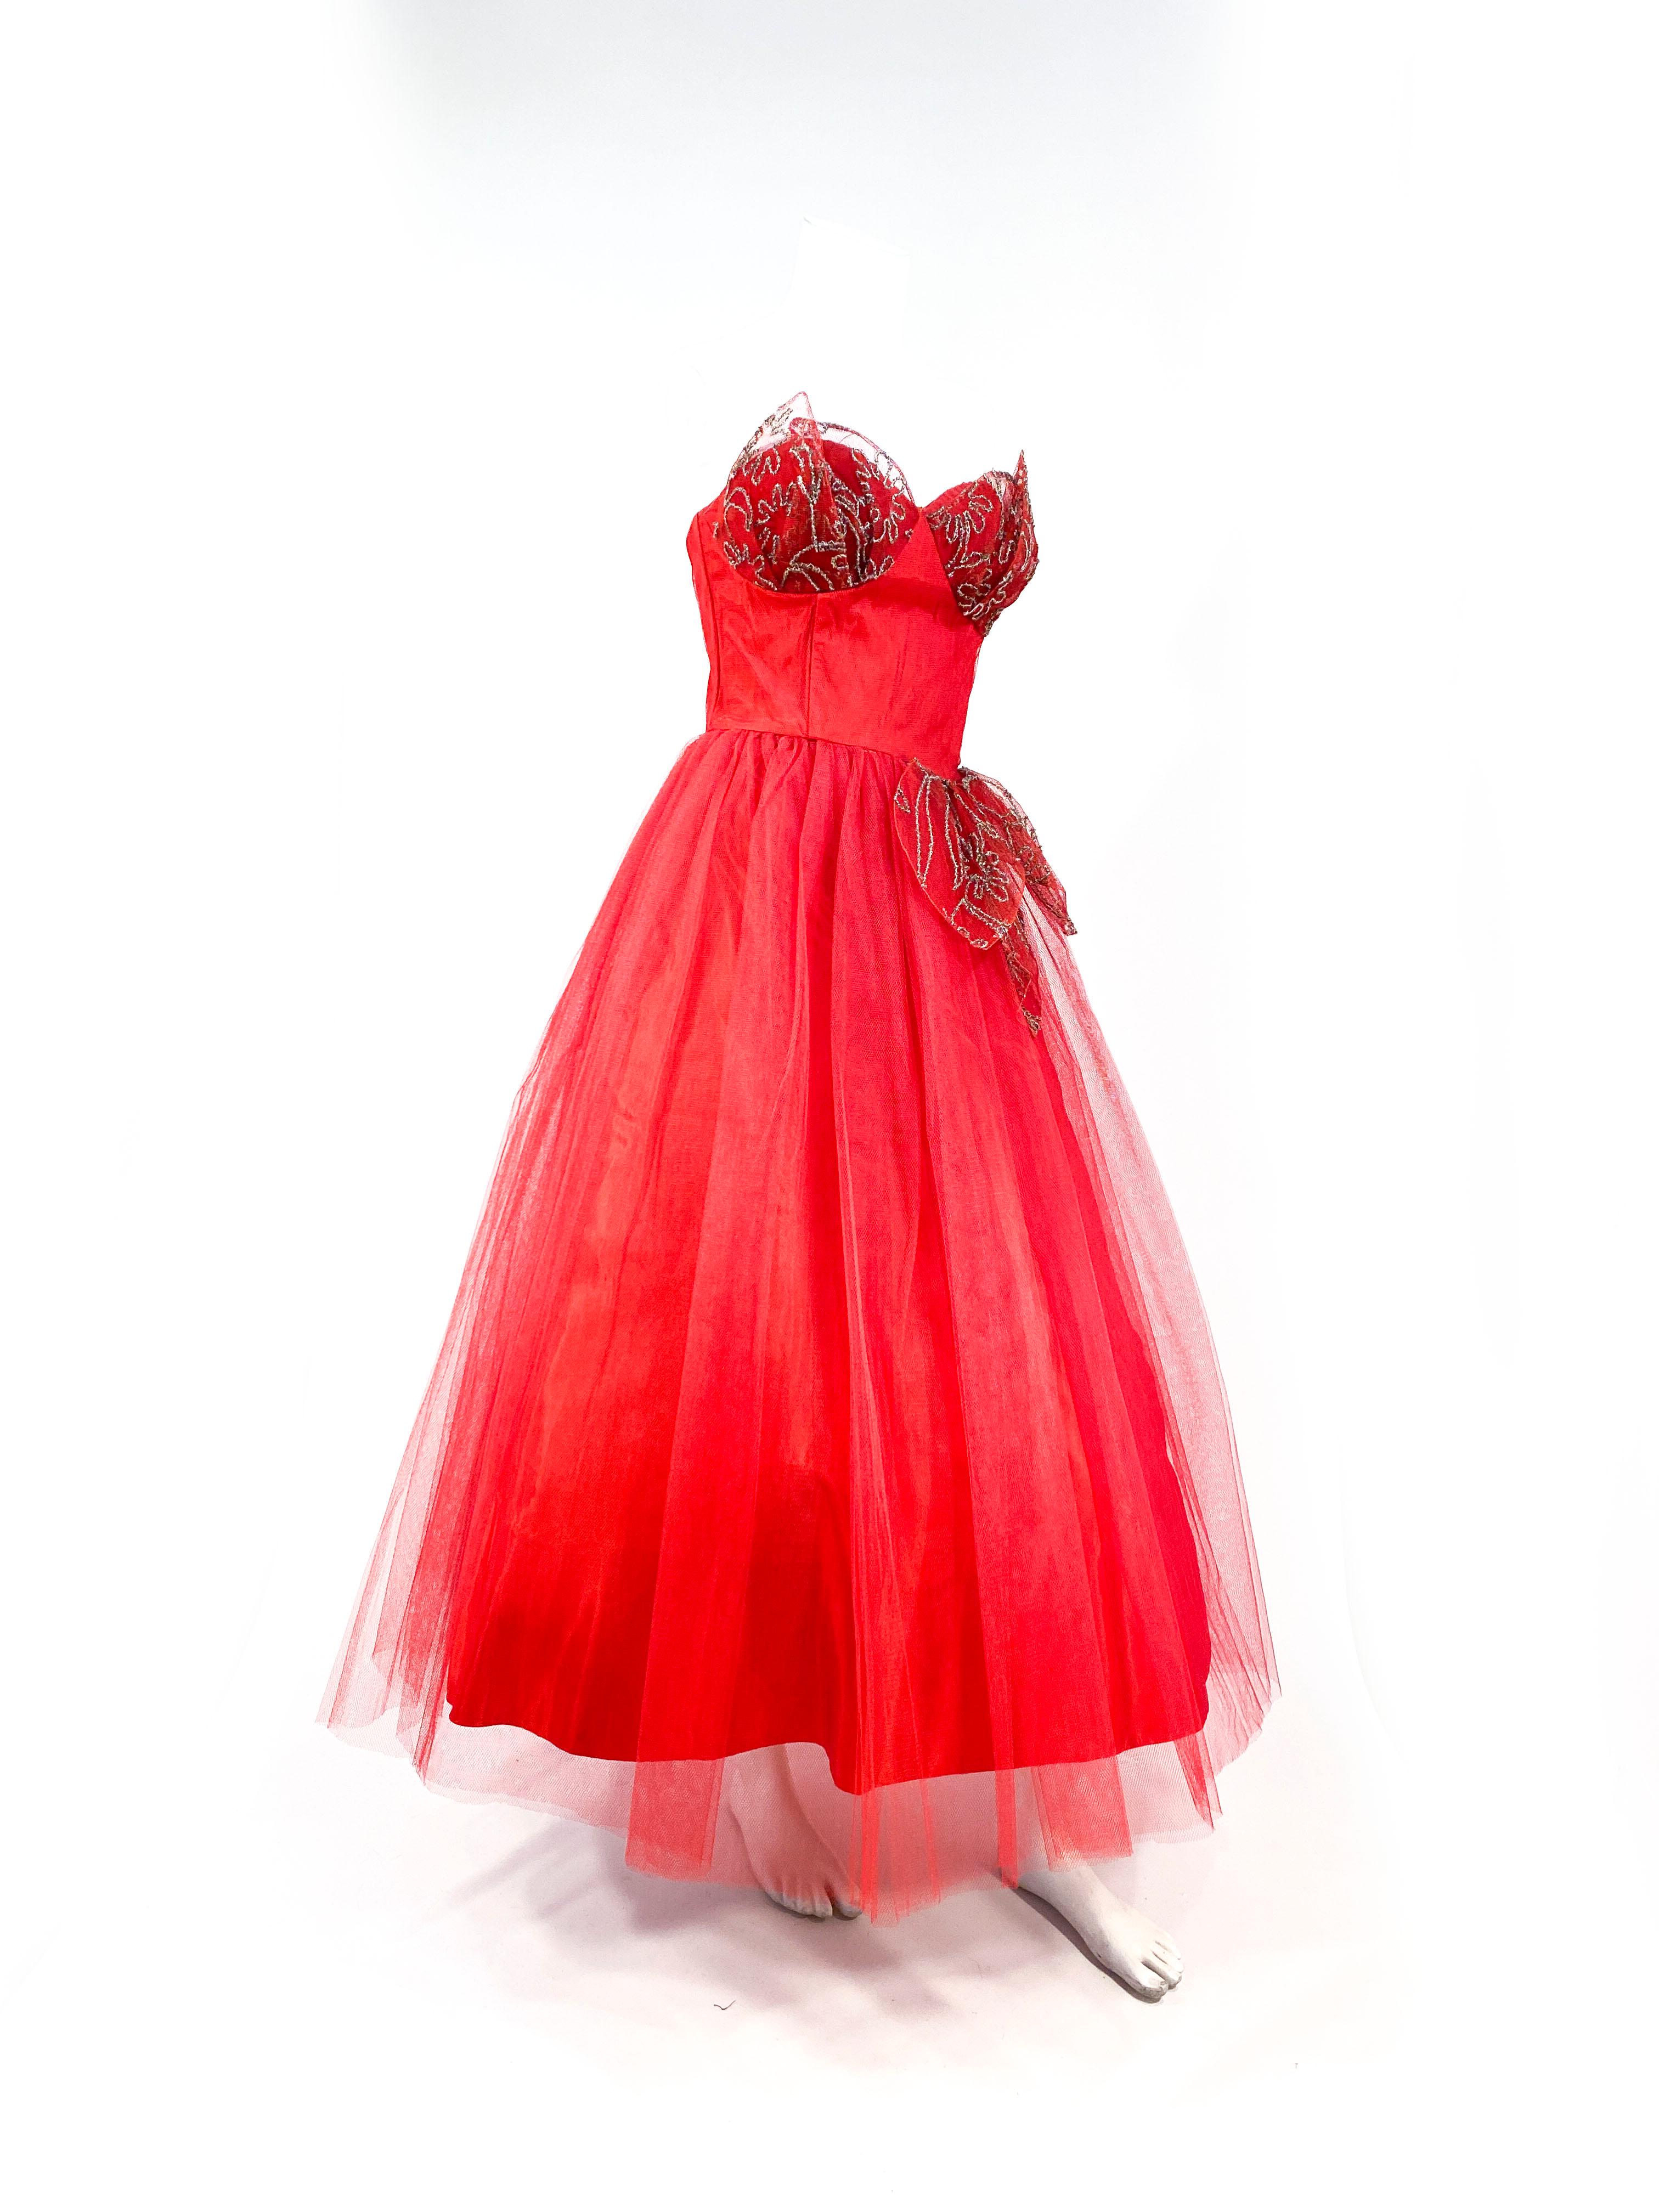 red tulle dresses